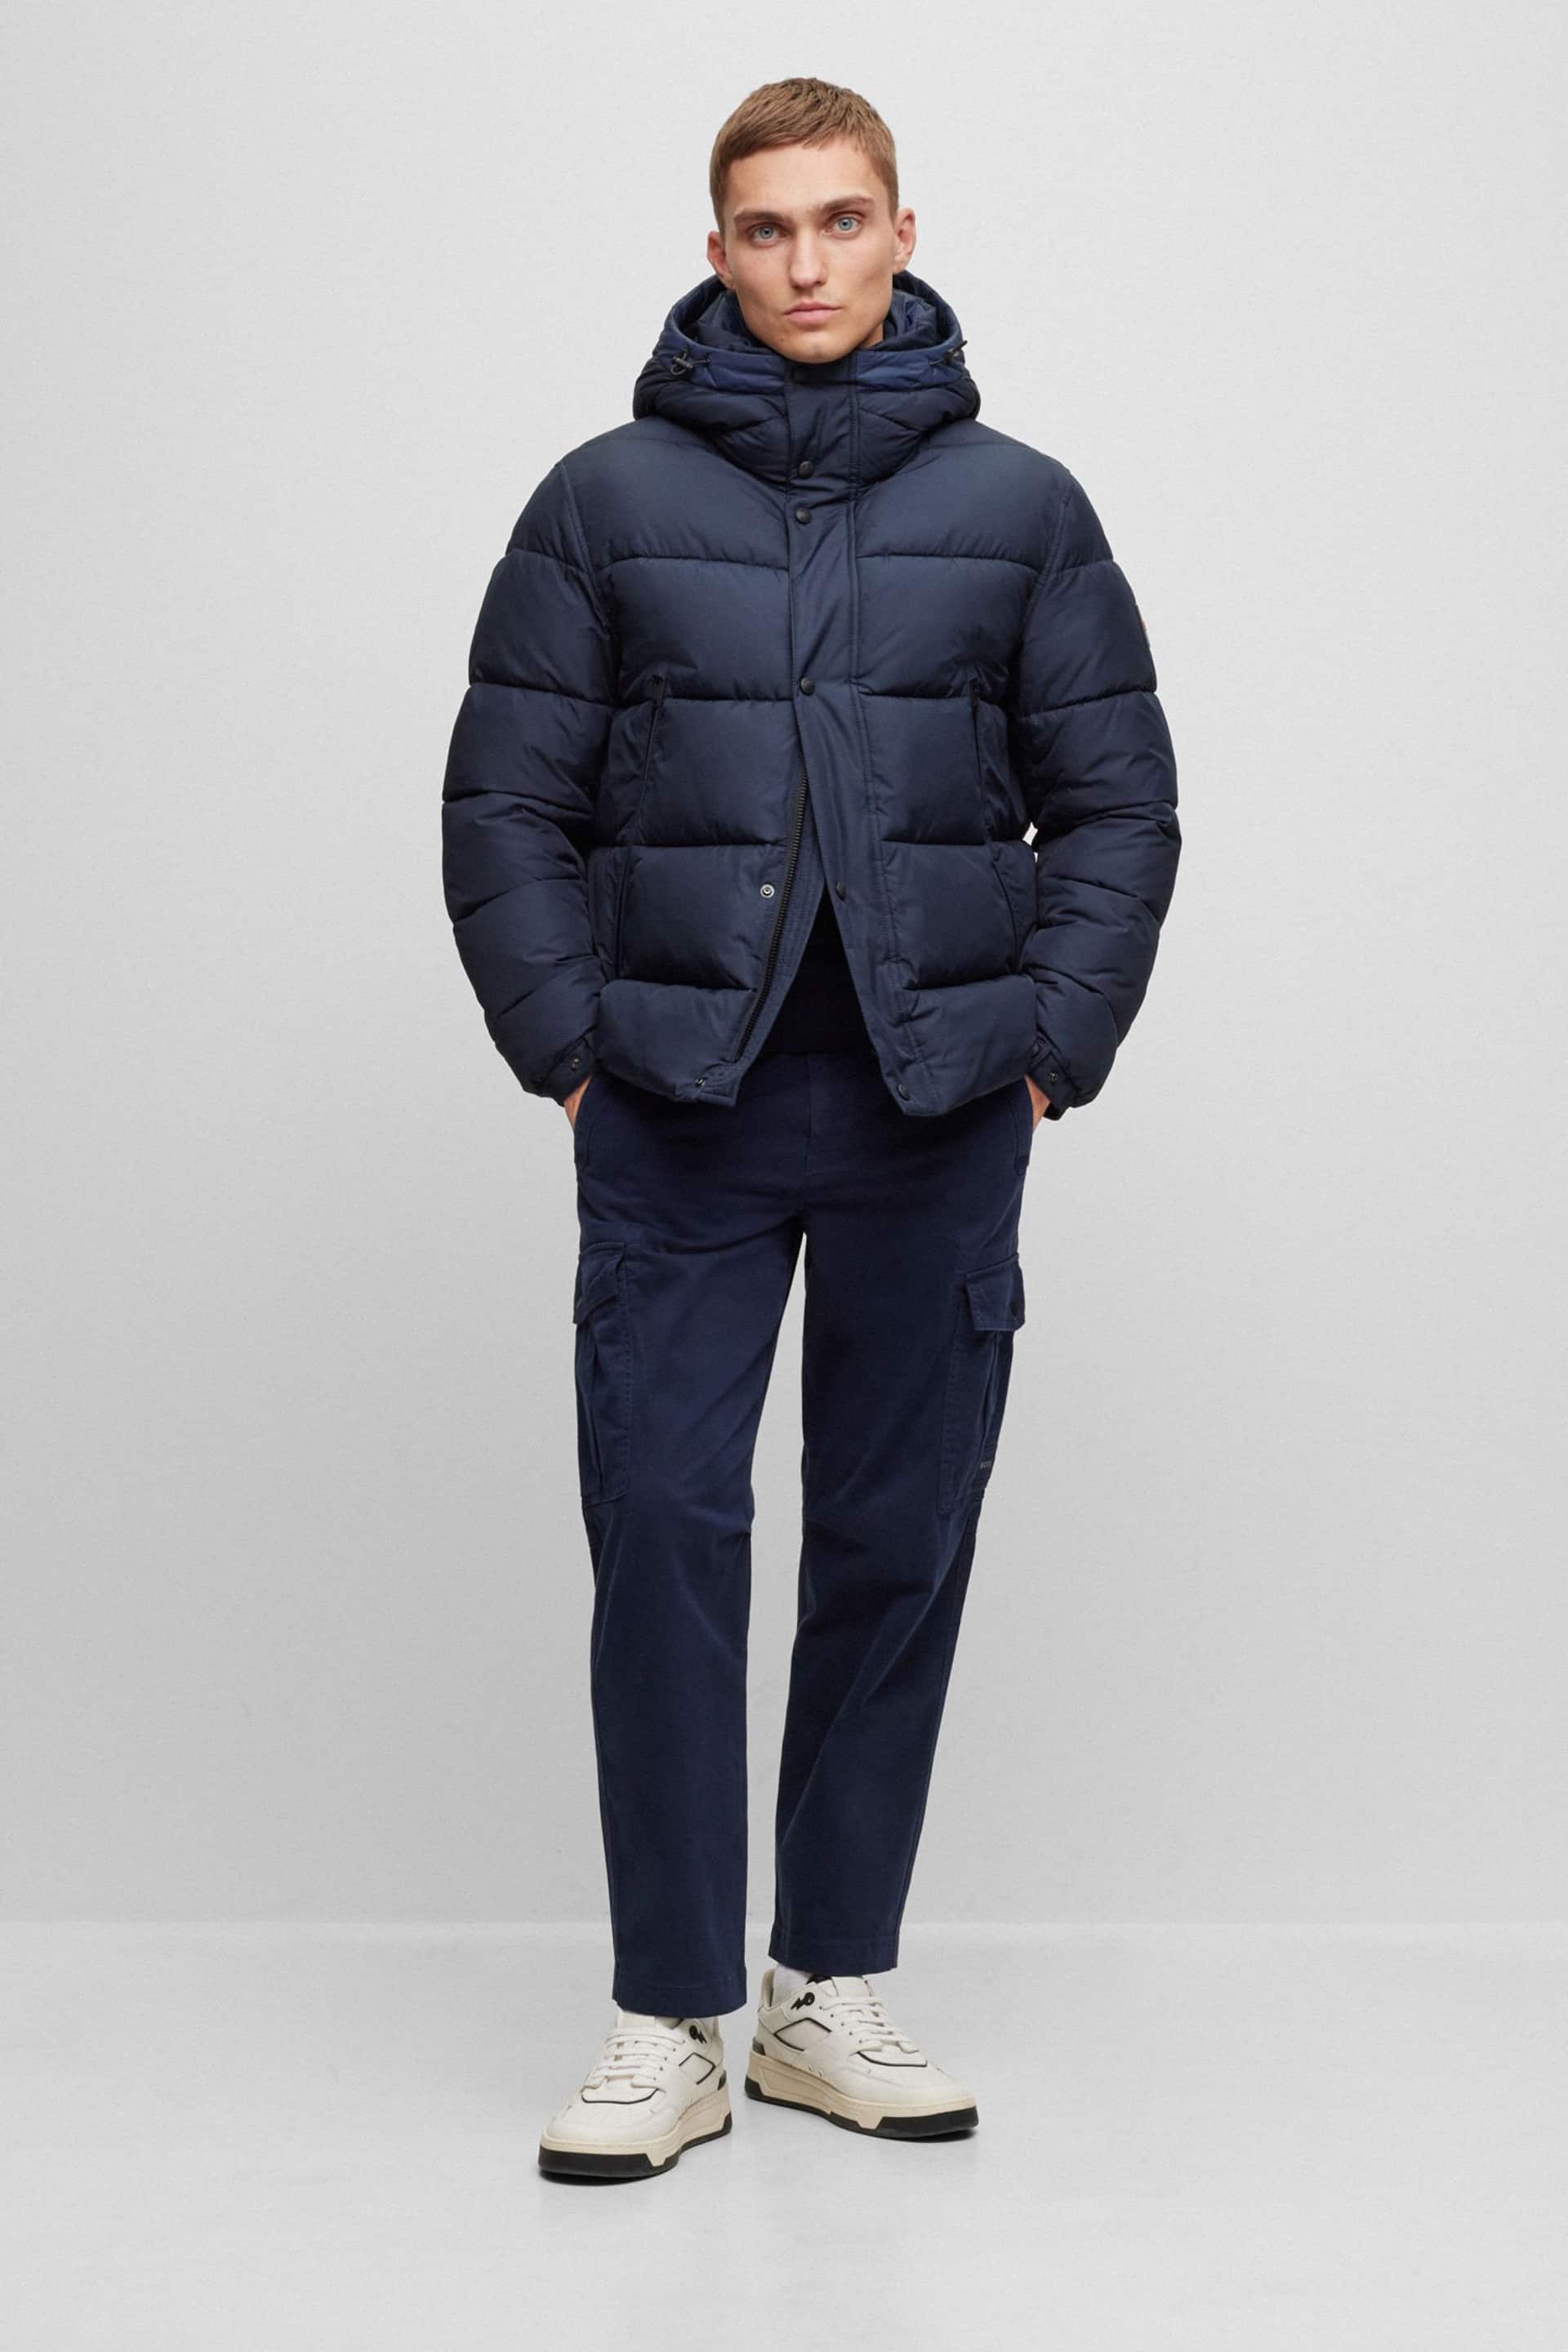 BOSS Blue Water Repellent Hooded Down Puffer Jacket - Image 3 of 6